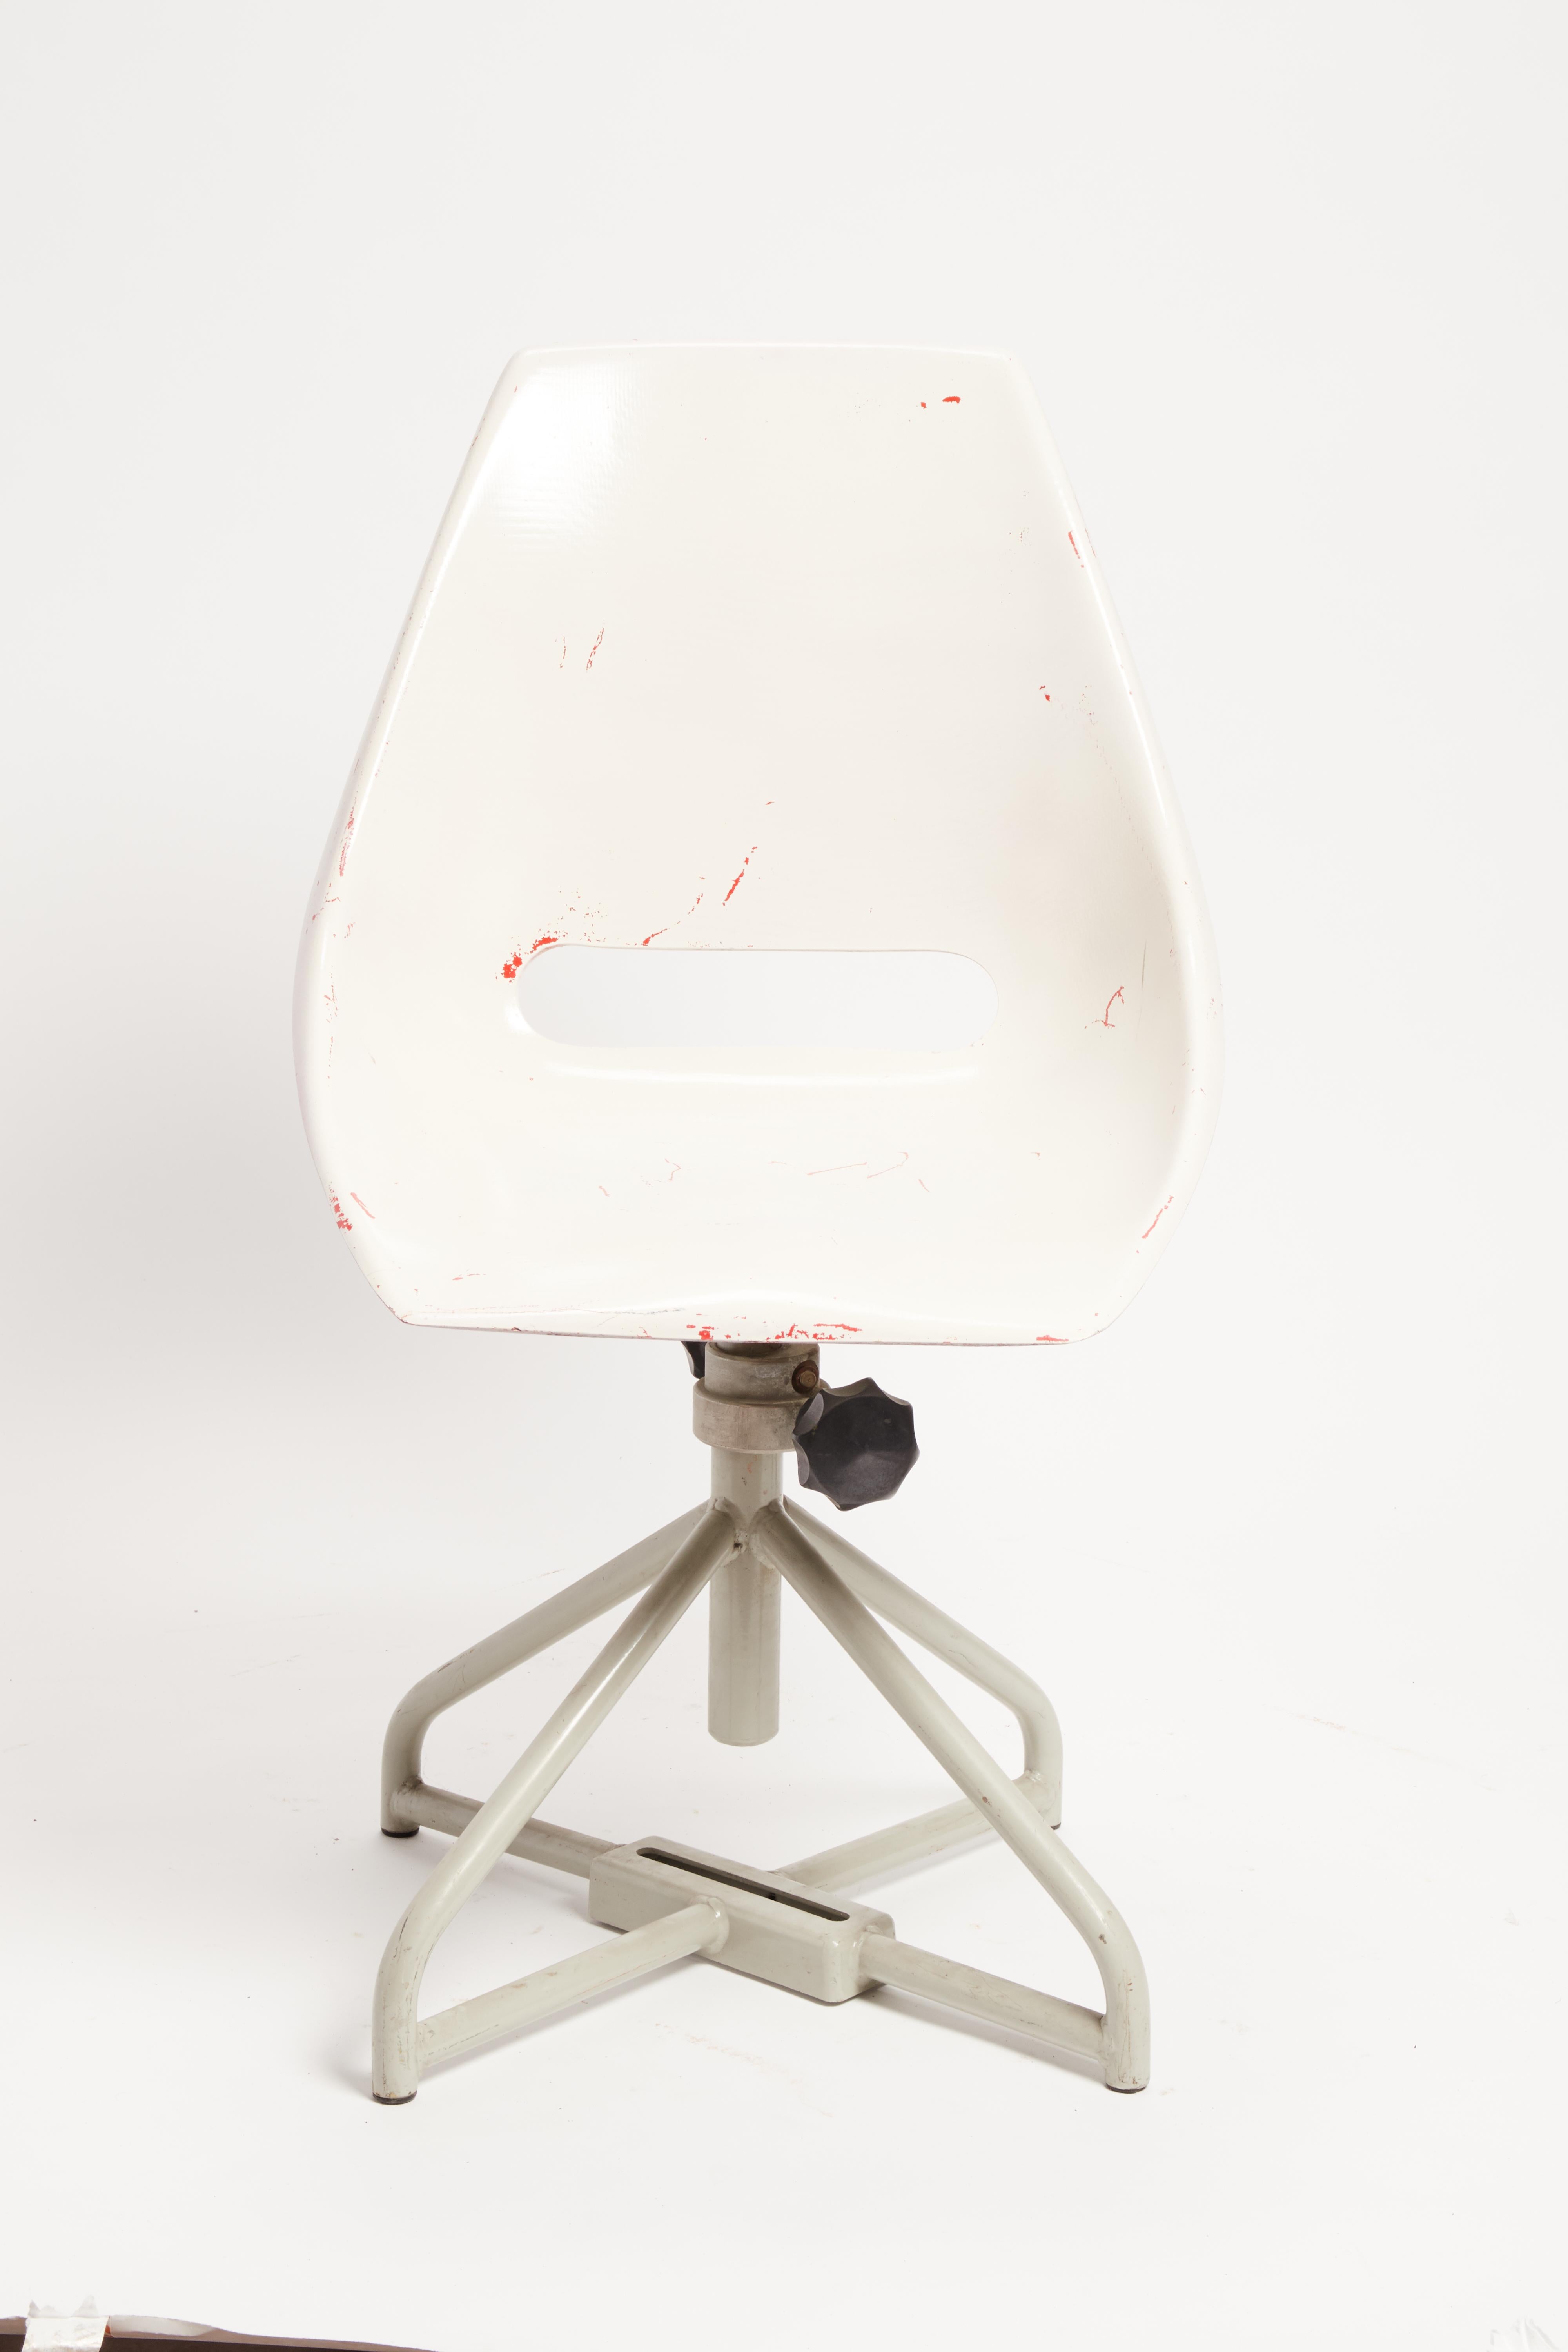 Multicolor Adjustable Fiberglass Chairs, Italy, 1950 In Good Condition For Sale In Milan, IT